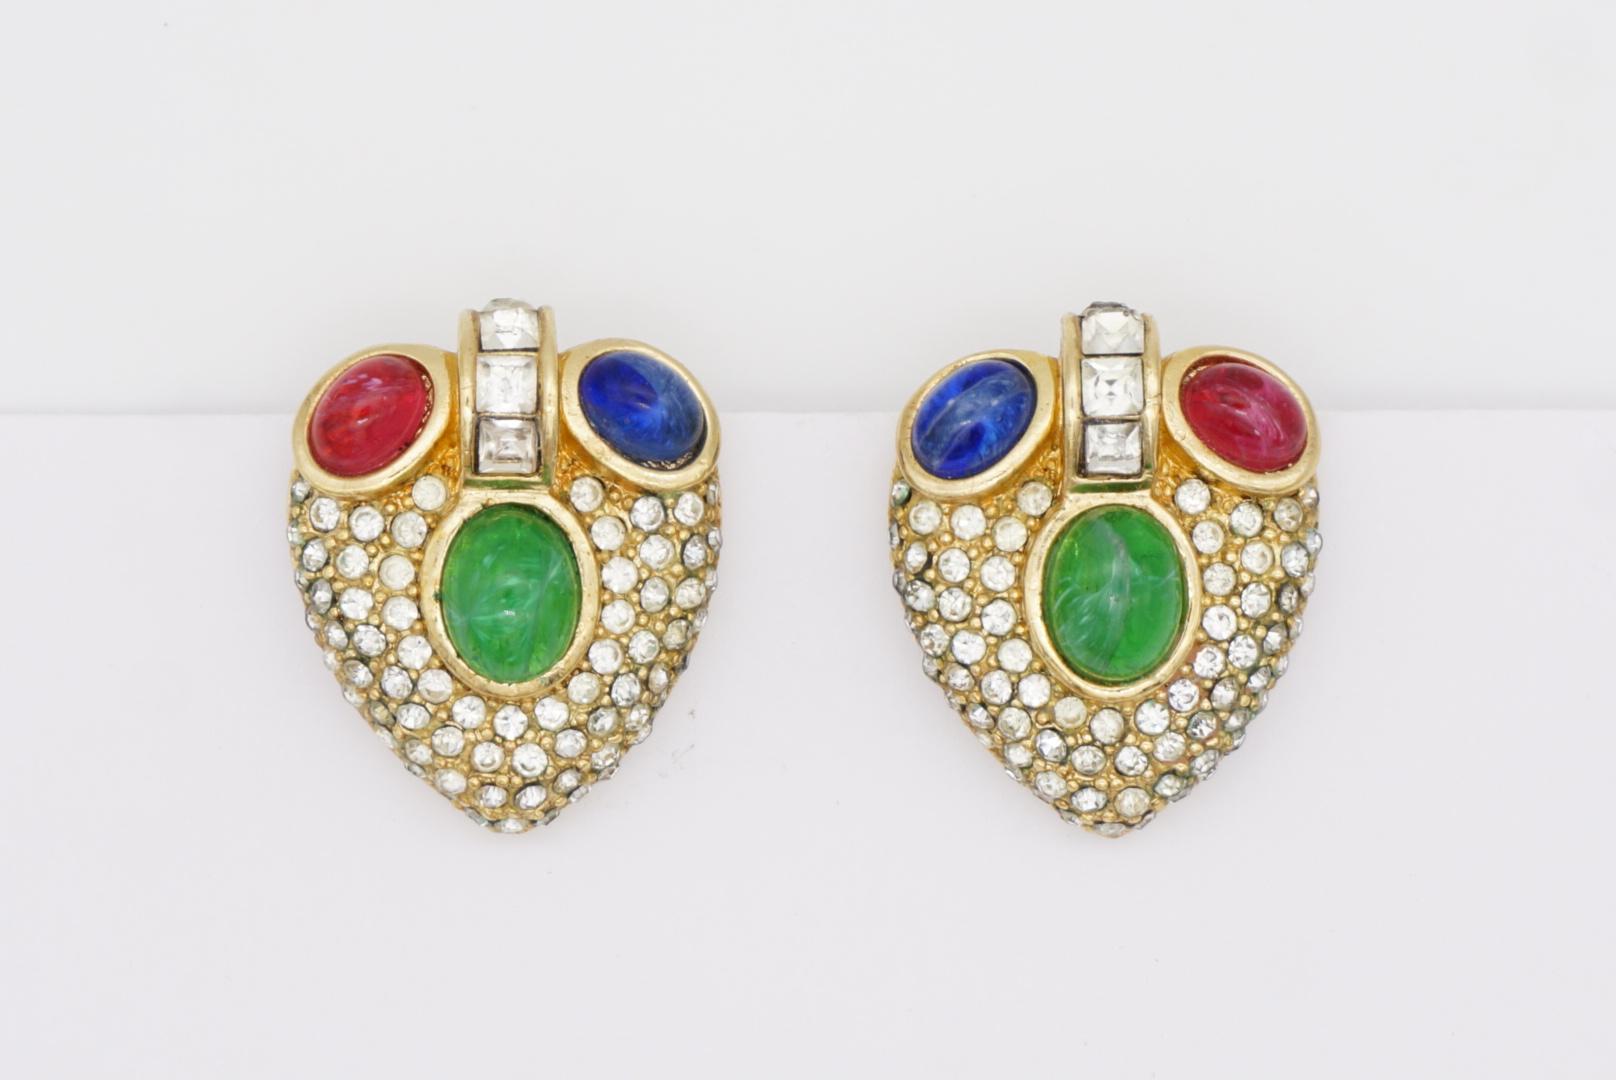 Christian Dior GROSSE 1960 Gripoix Sapphire Emerald Ruby Heart Crystals Earrings For Sale 4